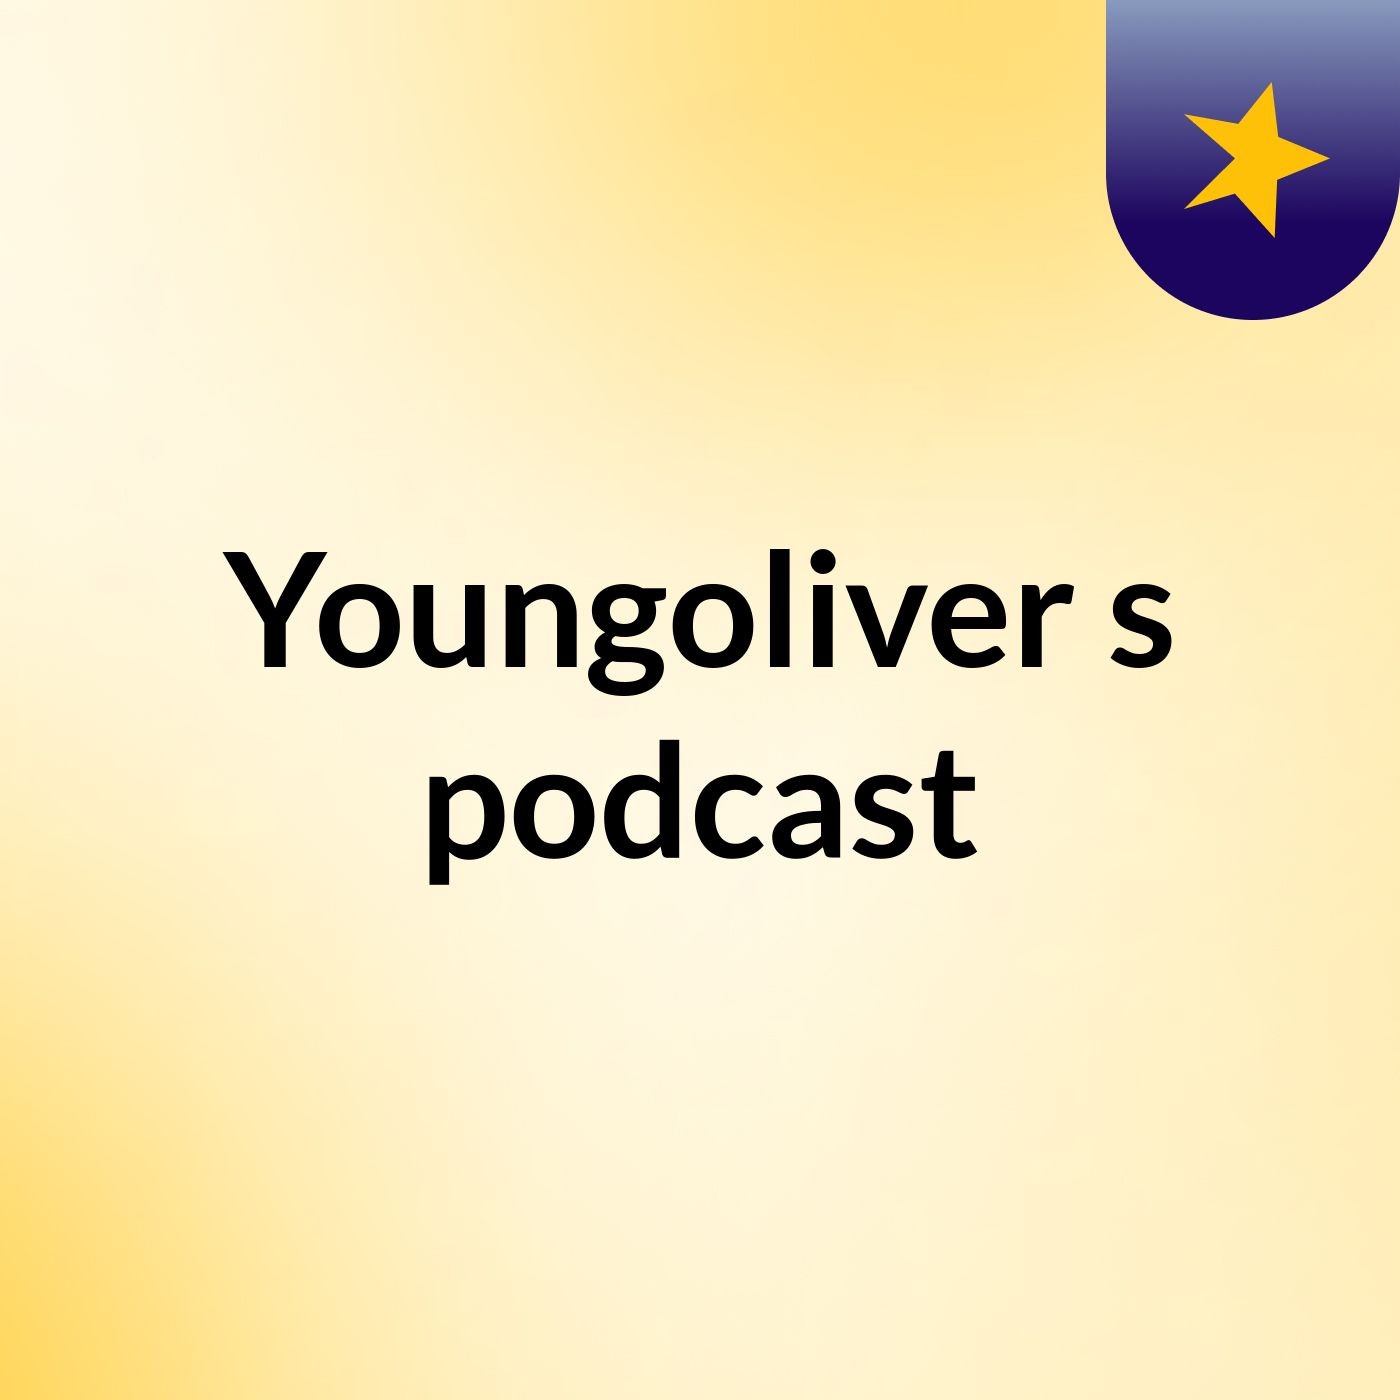 Episode 3 - Youngoliver's podcast